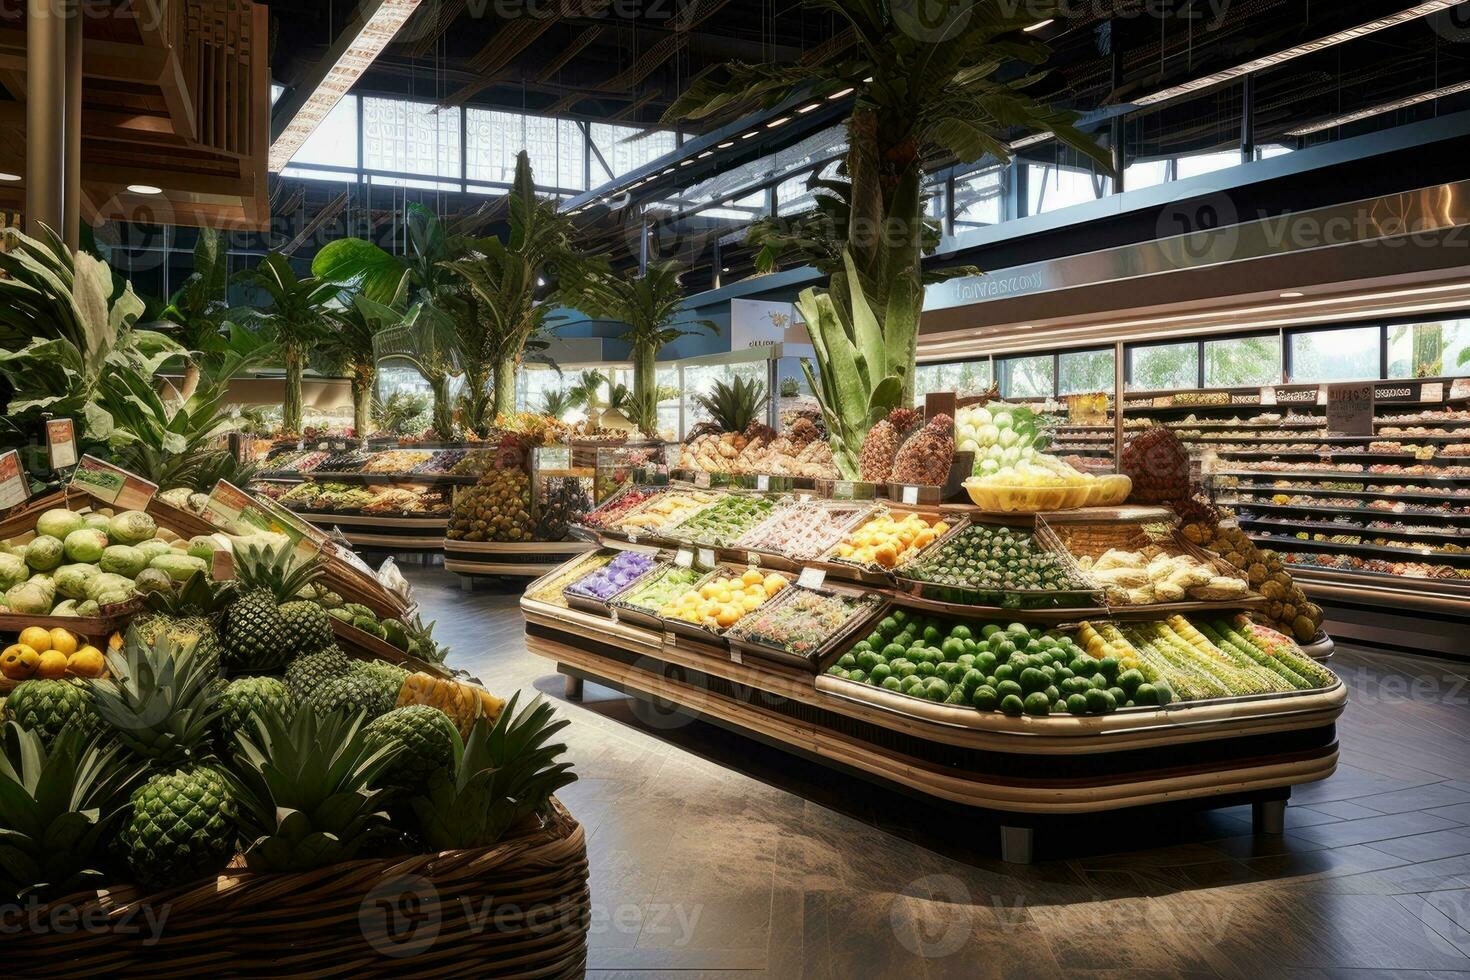 Vegetables and fruits in a grocery store. photo